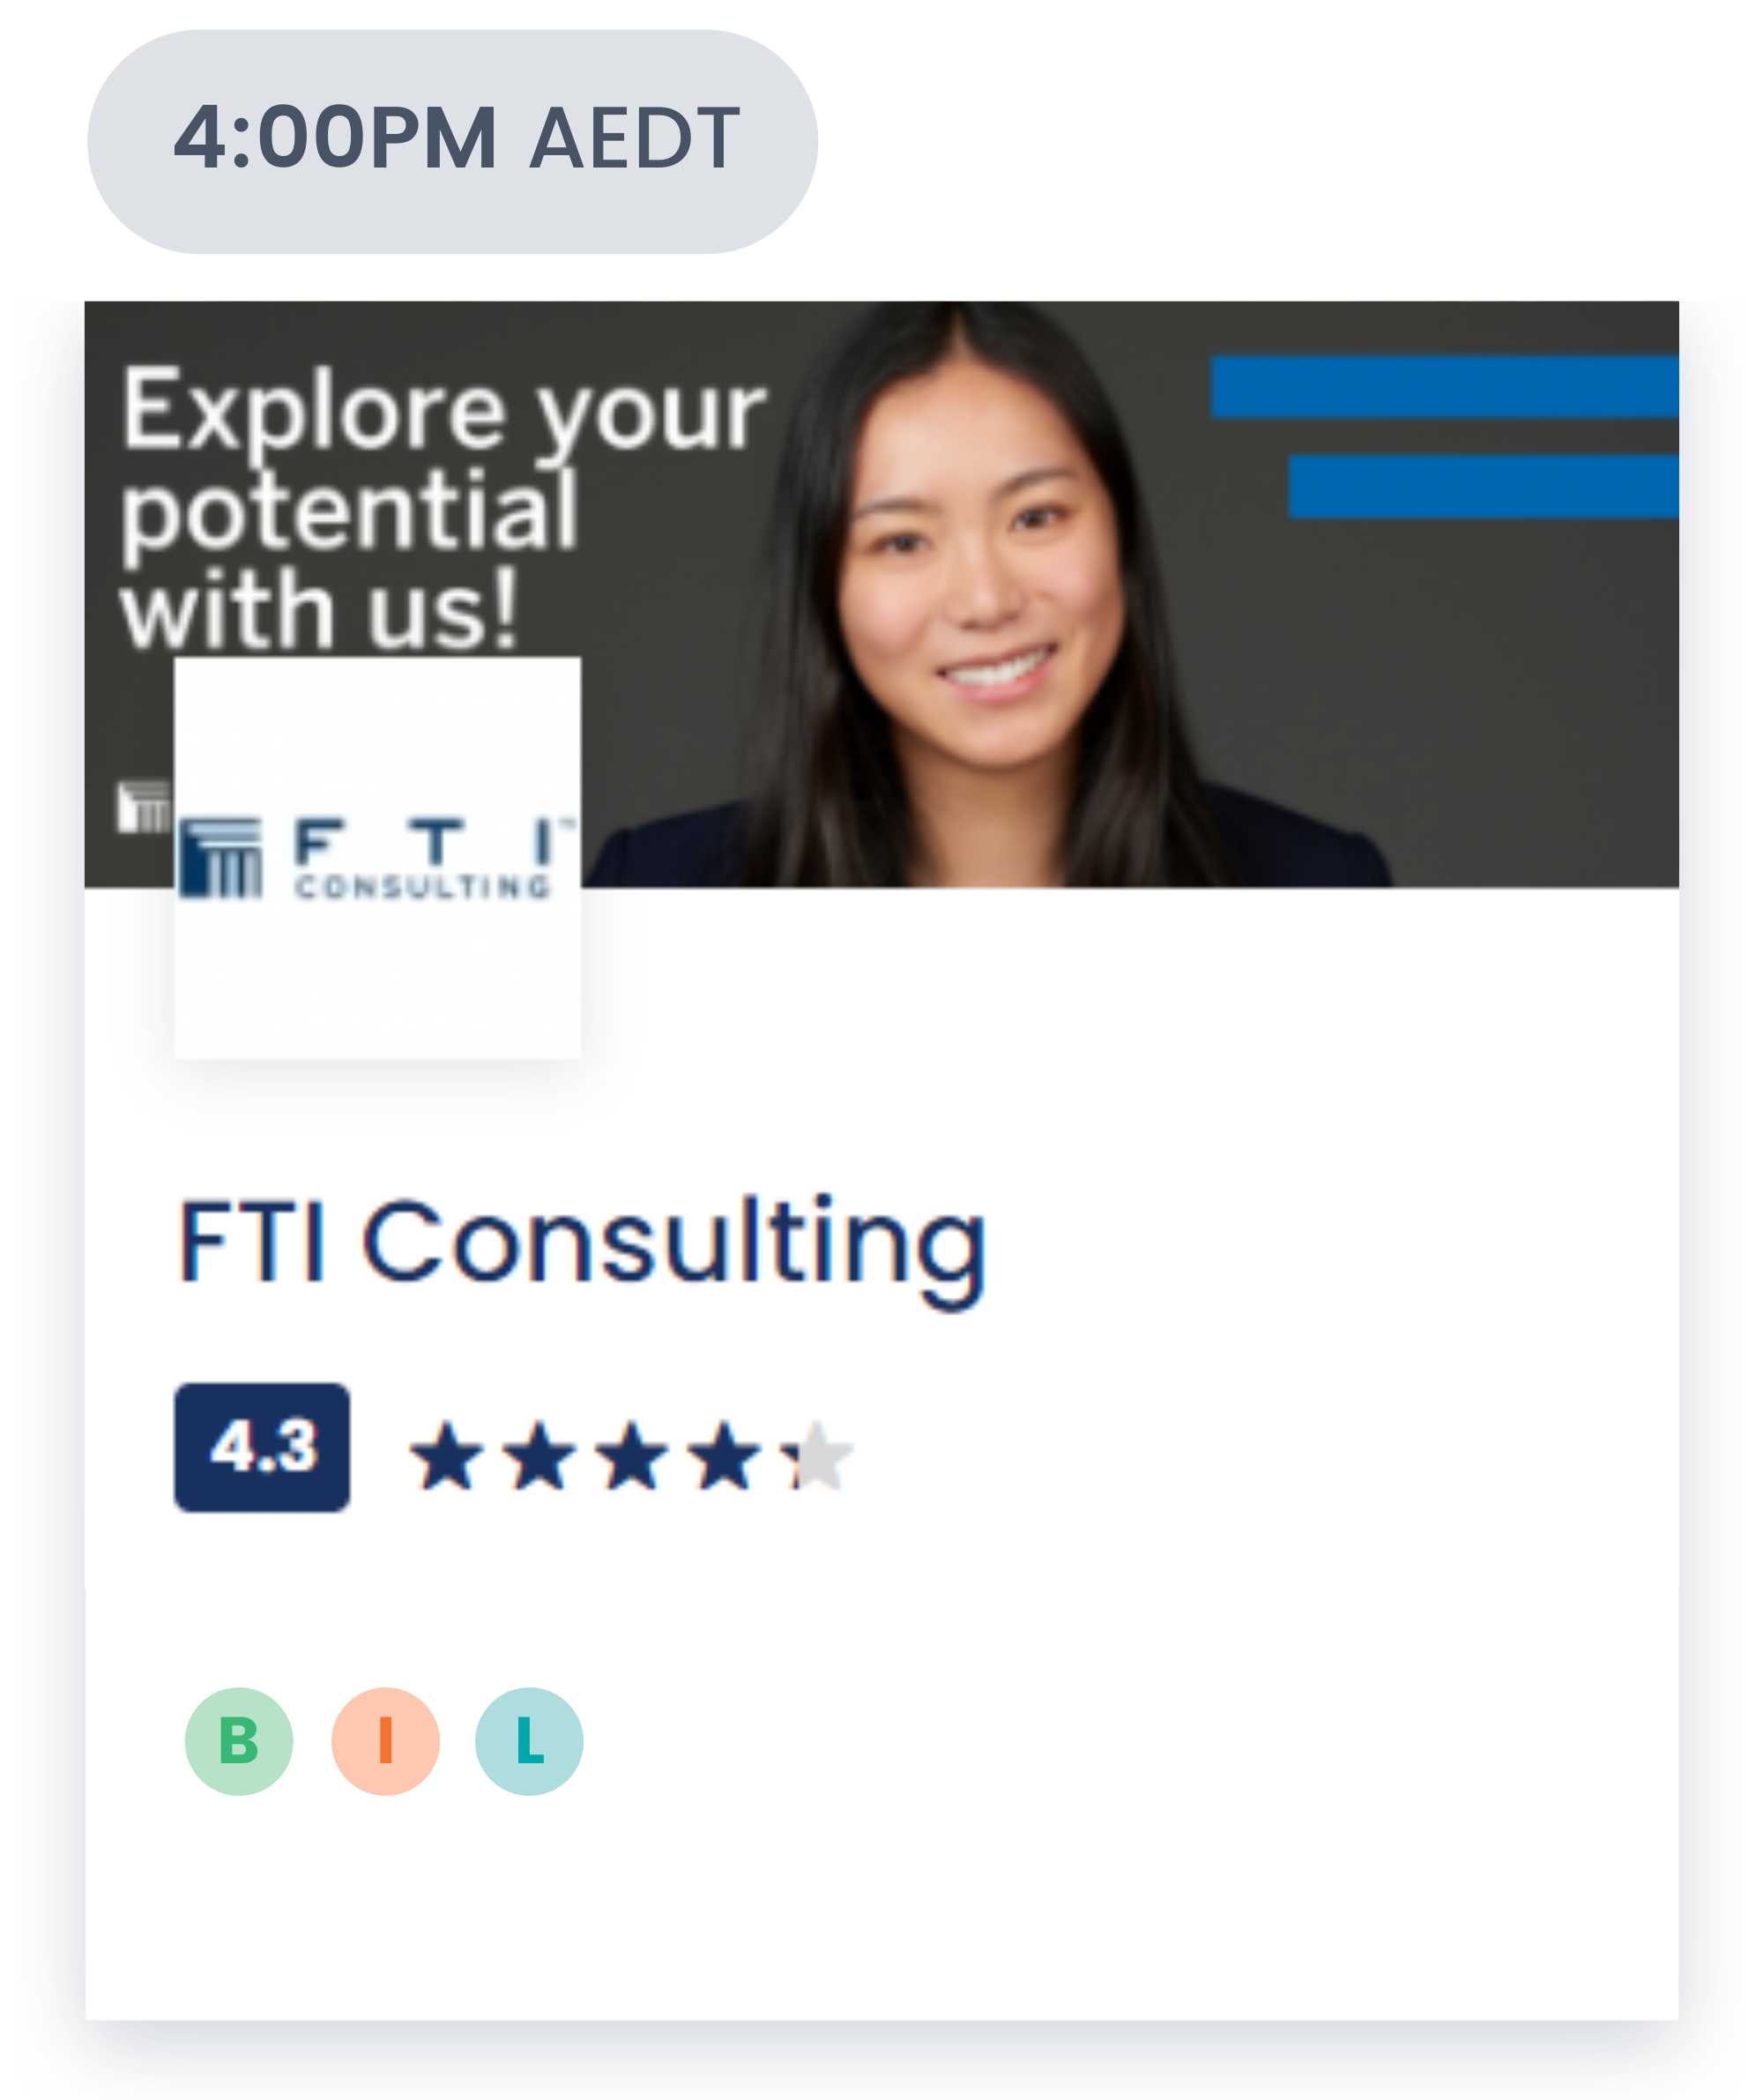 anz-super-fair-fti-consulting-tile.png 